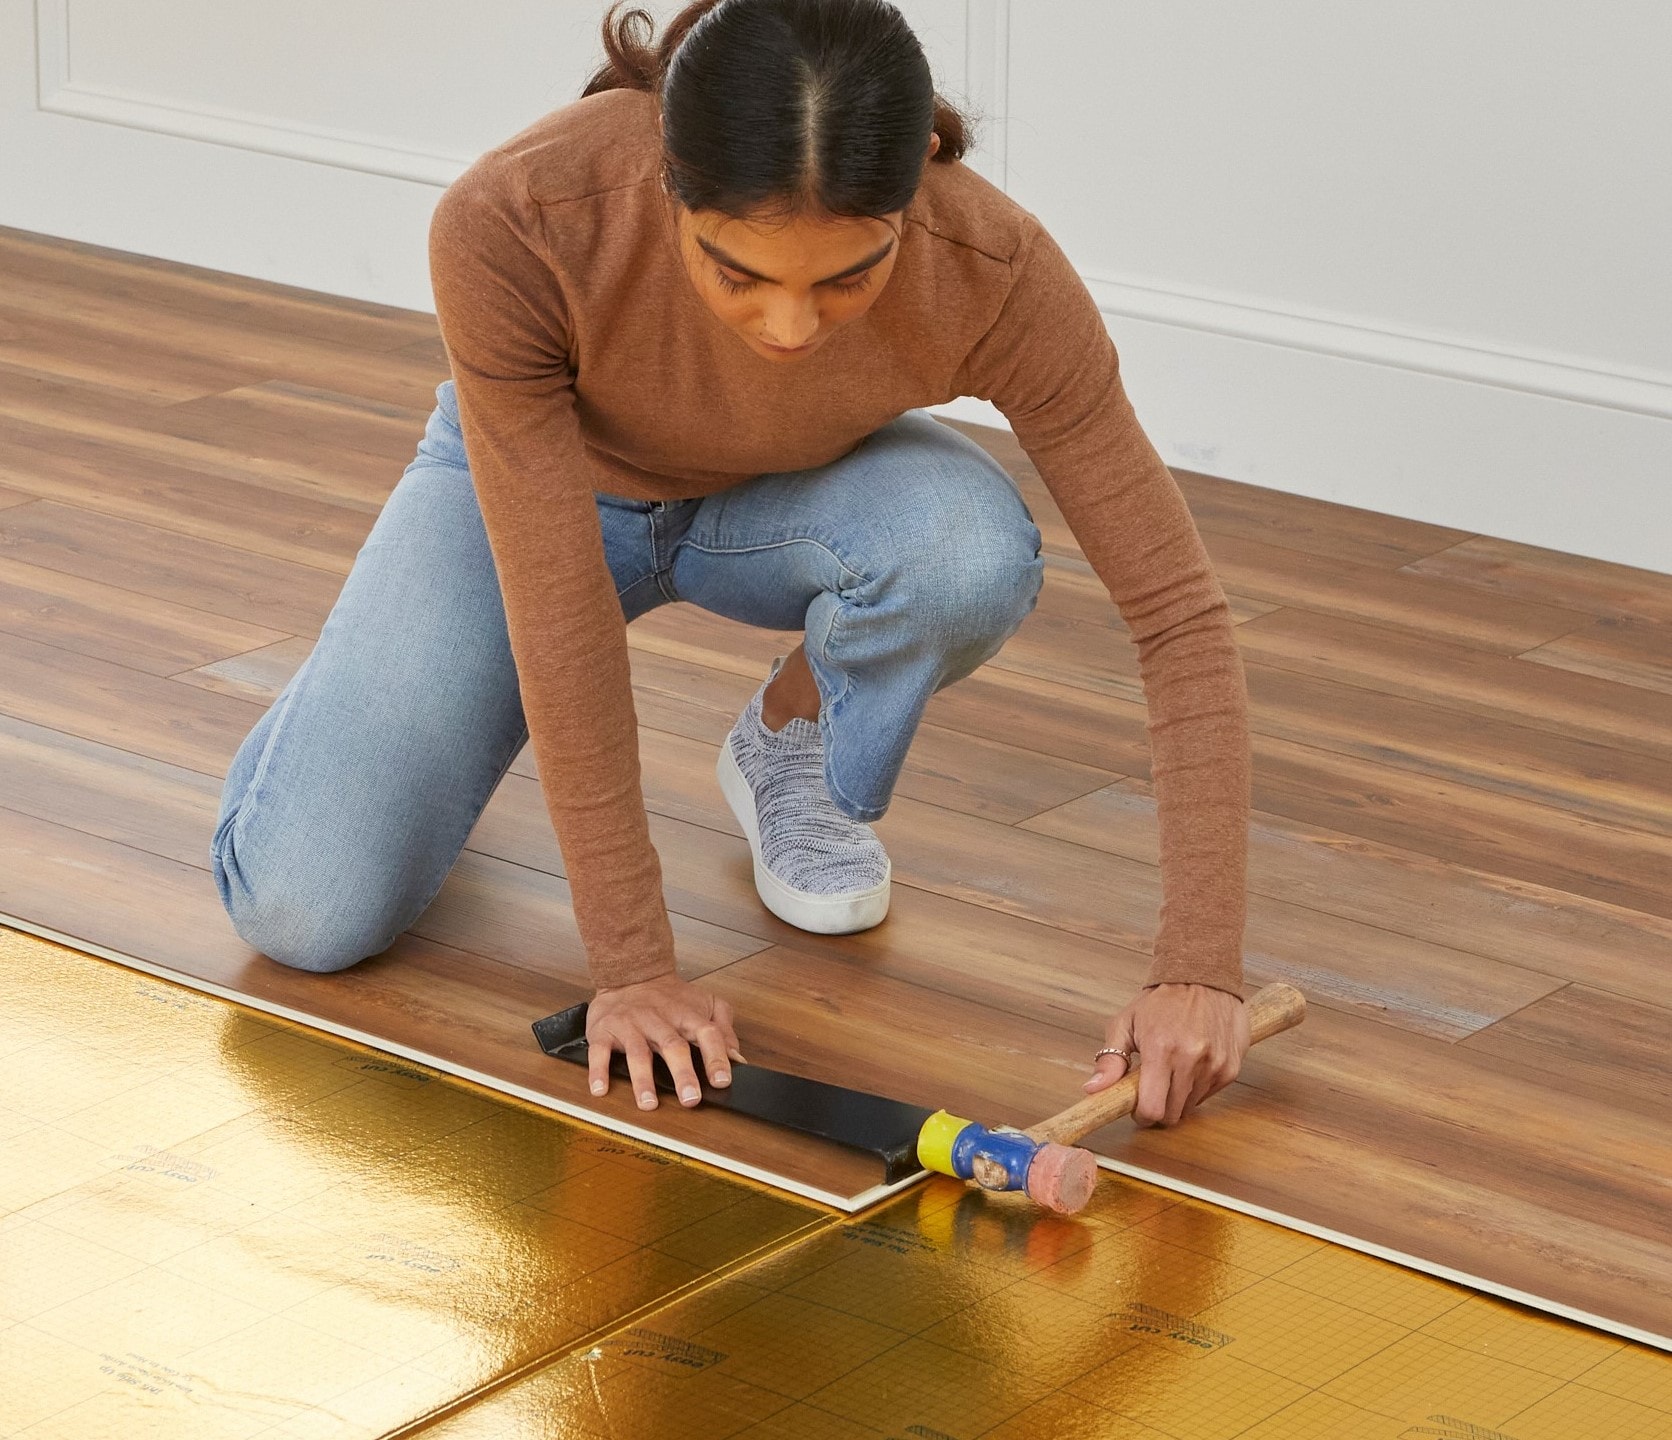 QuietWalk Laminate and Floating Wood Flooring Underlayment with